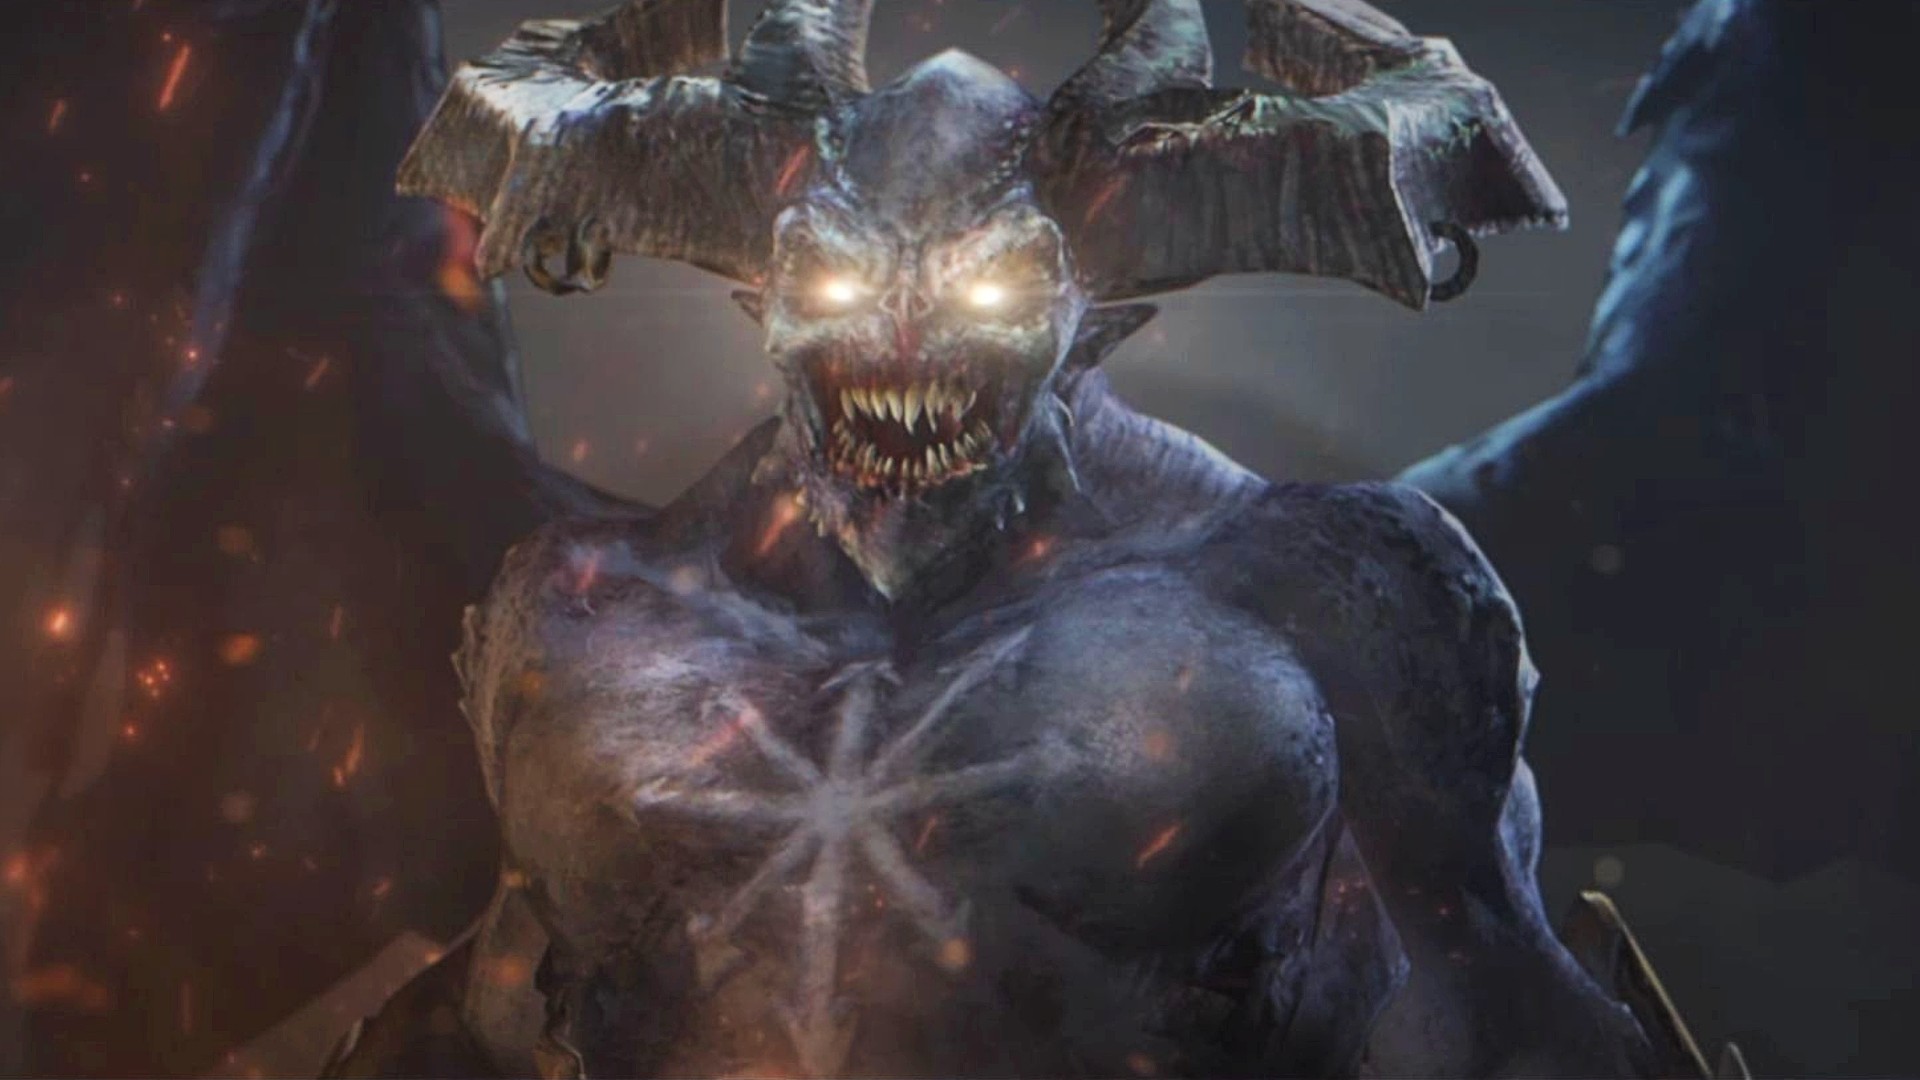 Total Warhammer 3's final boss is Be'lakor, and he's voiced by Richard Armitage